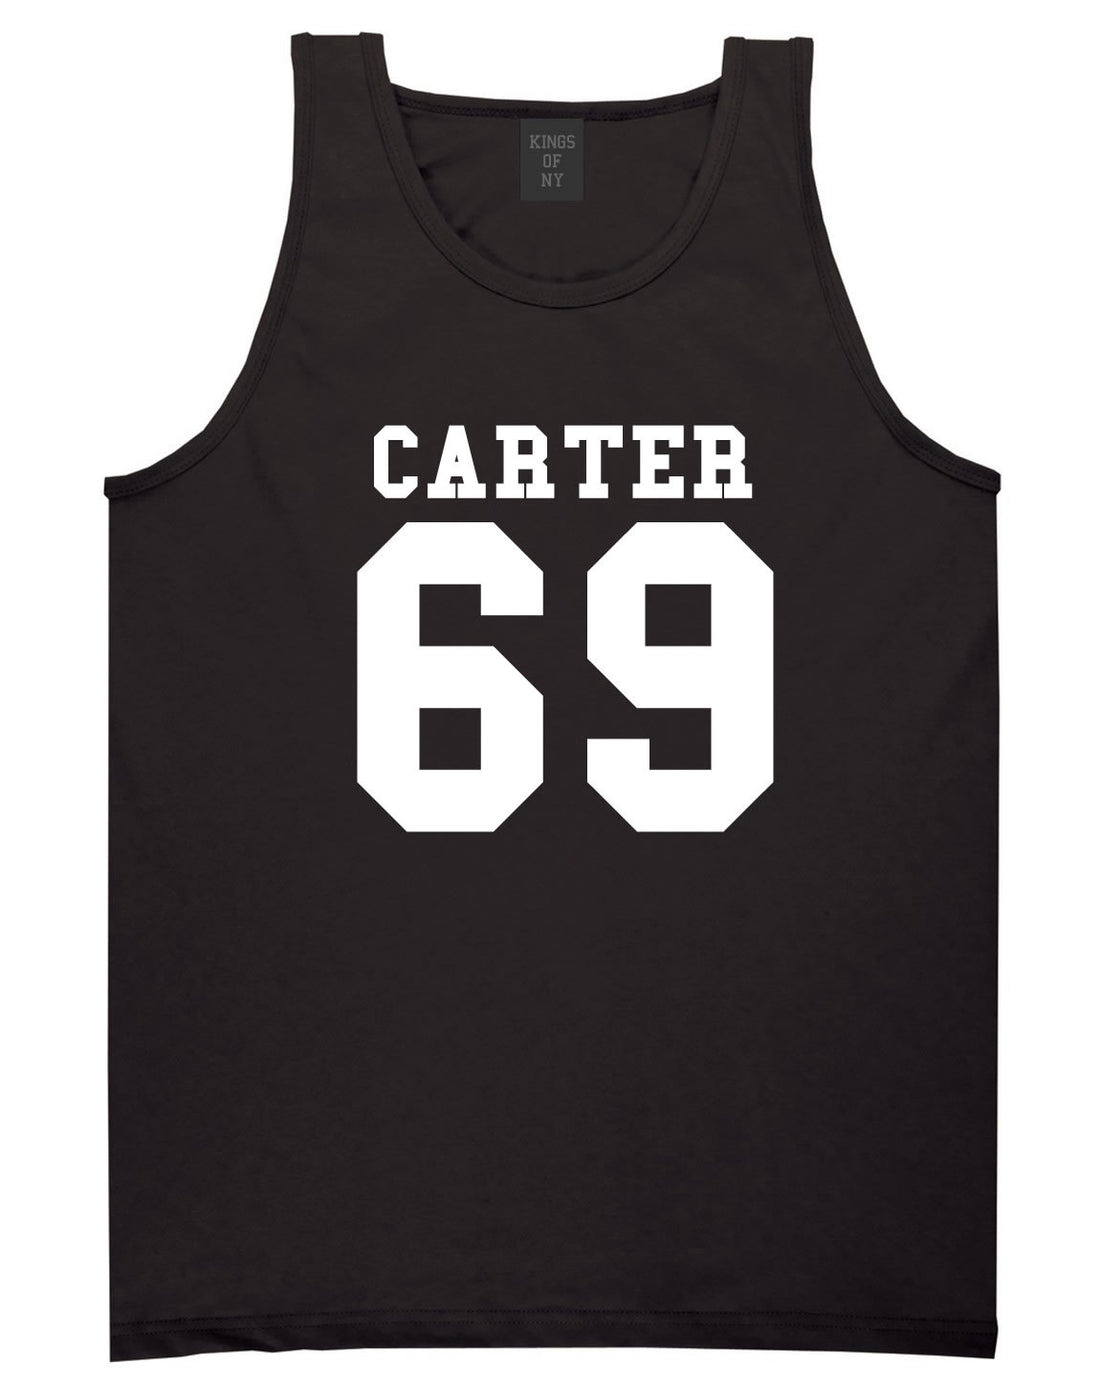  Carter 69 Team Tank Top in Black by Kings Of NY